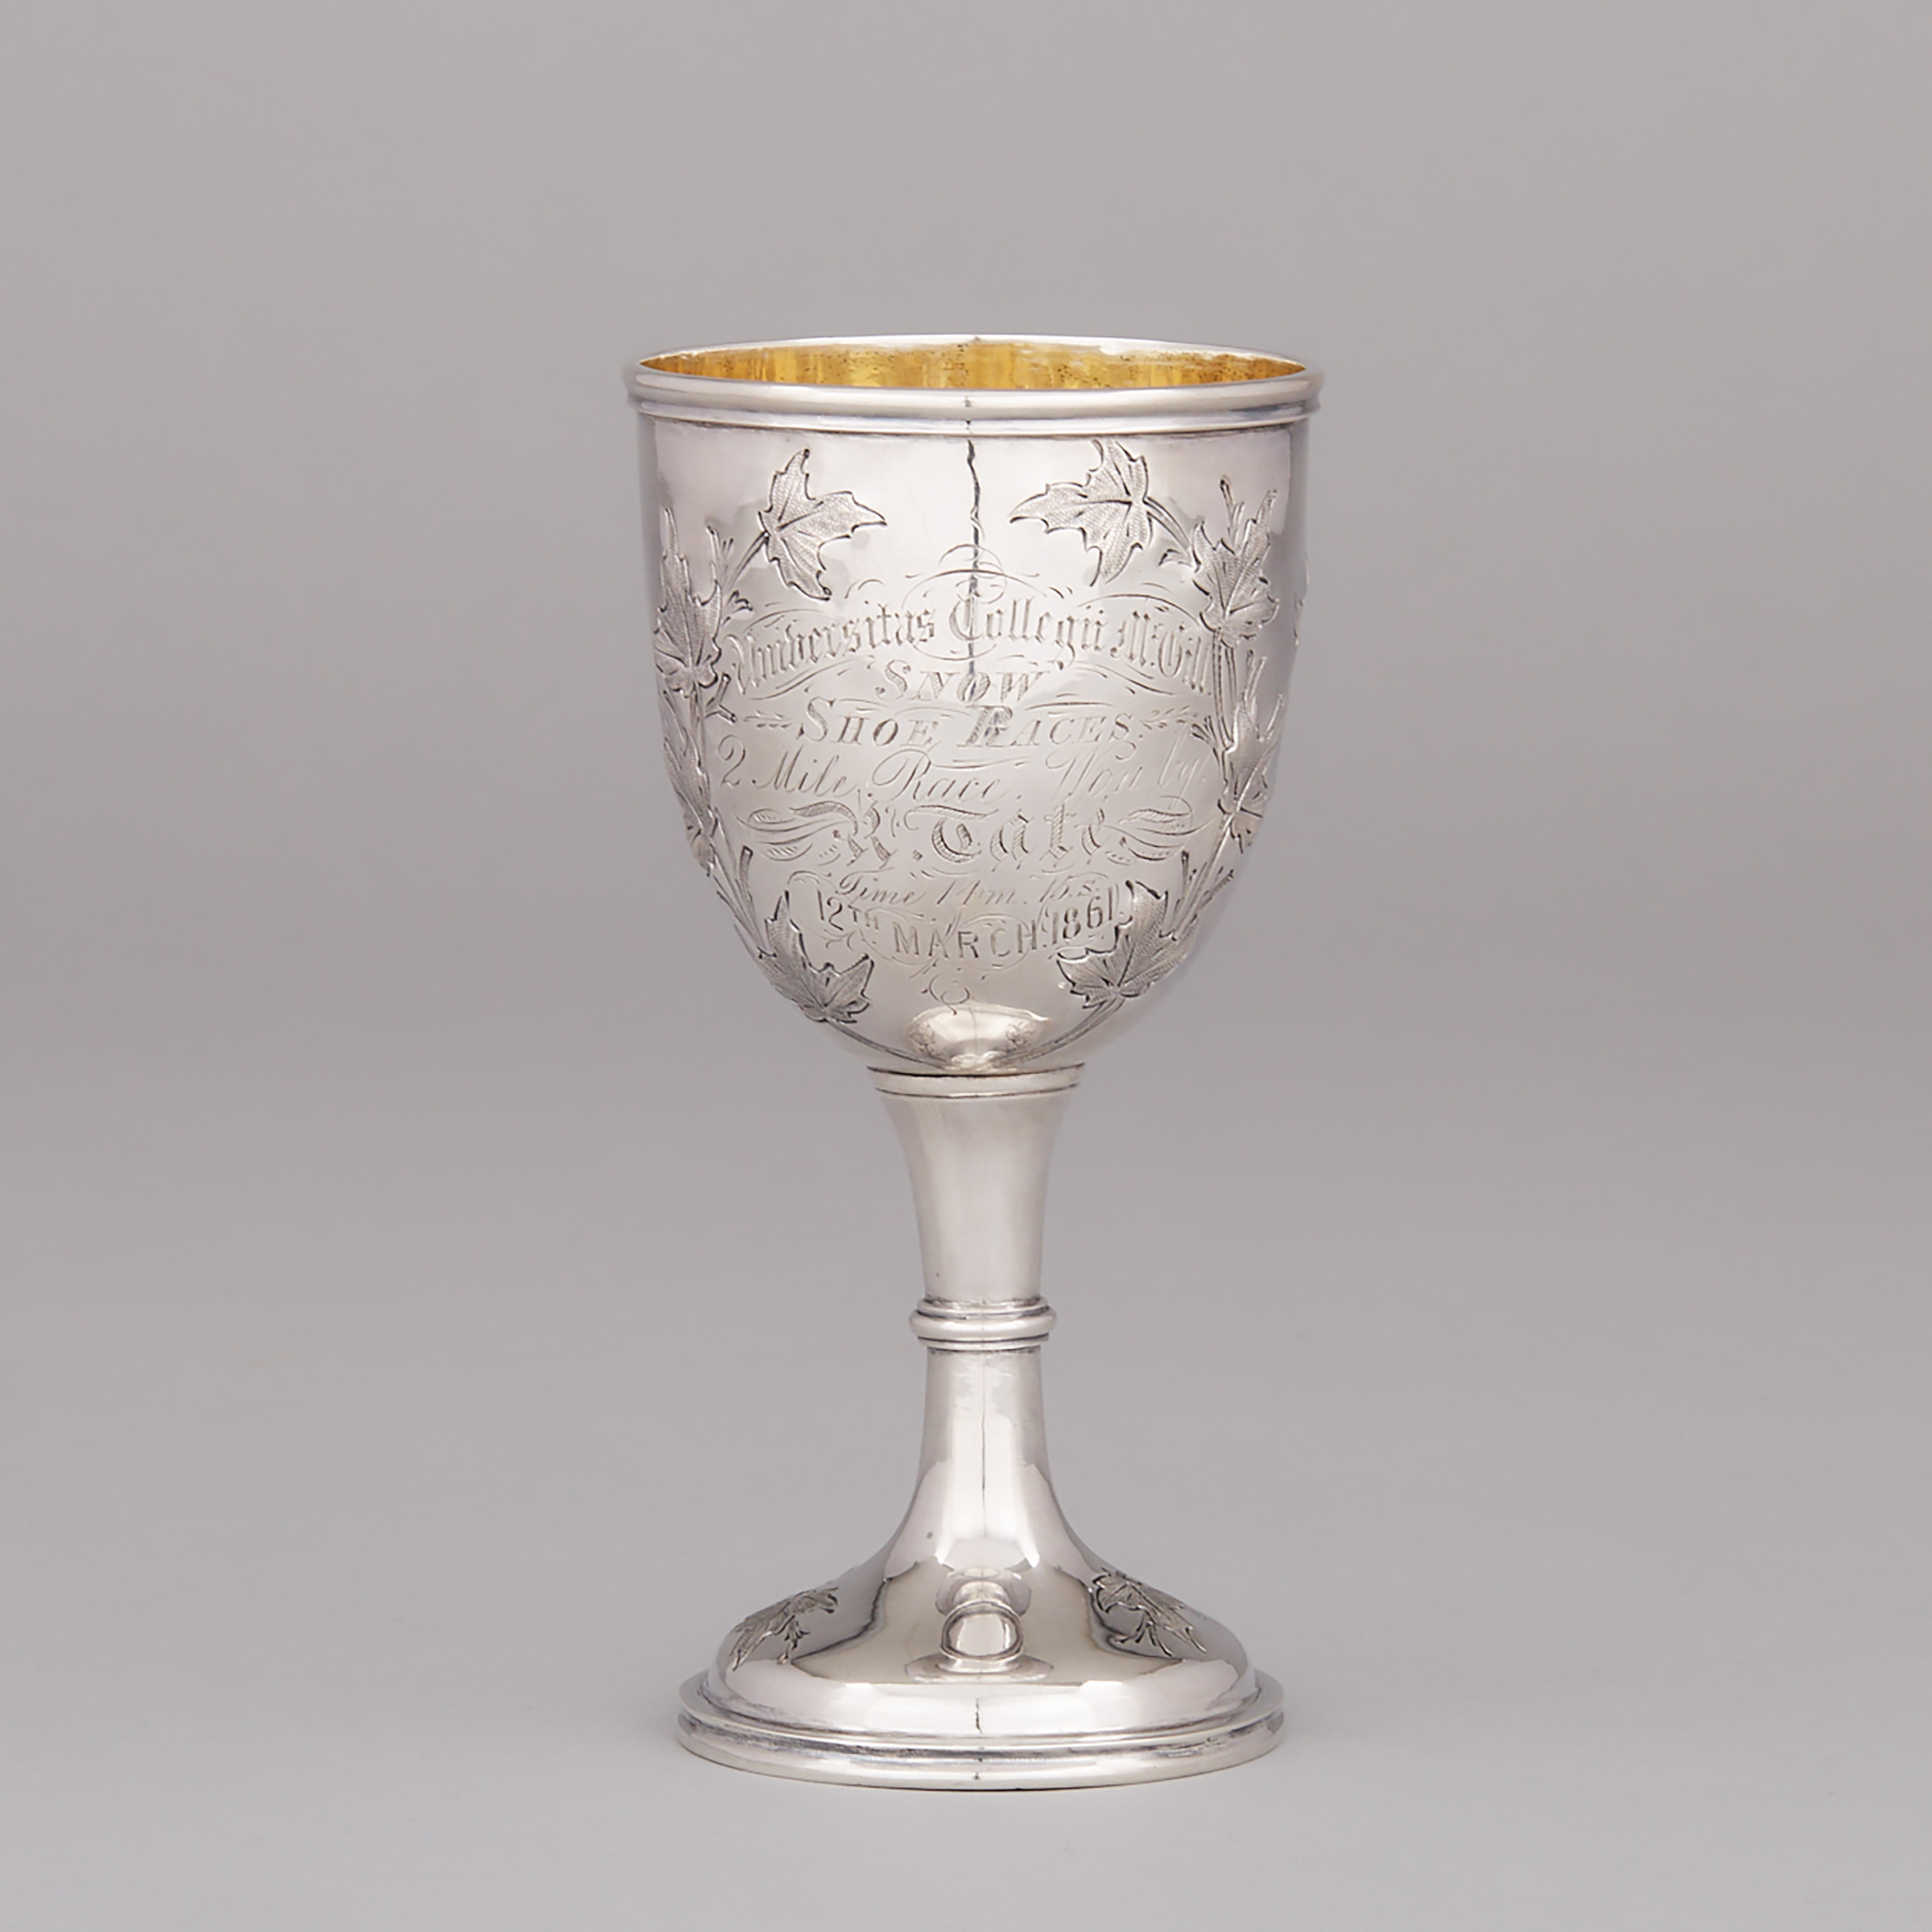 Canadian Silver McGill University Snow Shoe Trophy Cup, Robert Hendery, Montreal, Que., c.1860